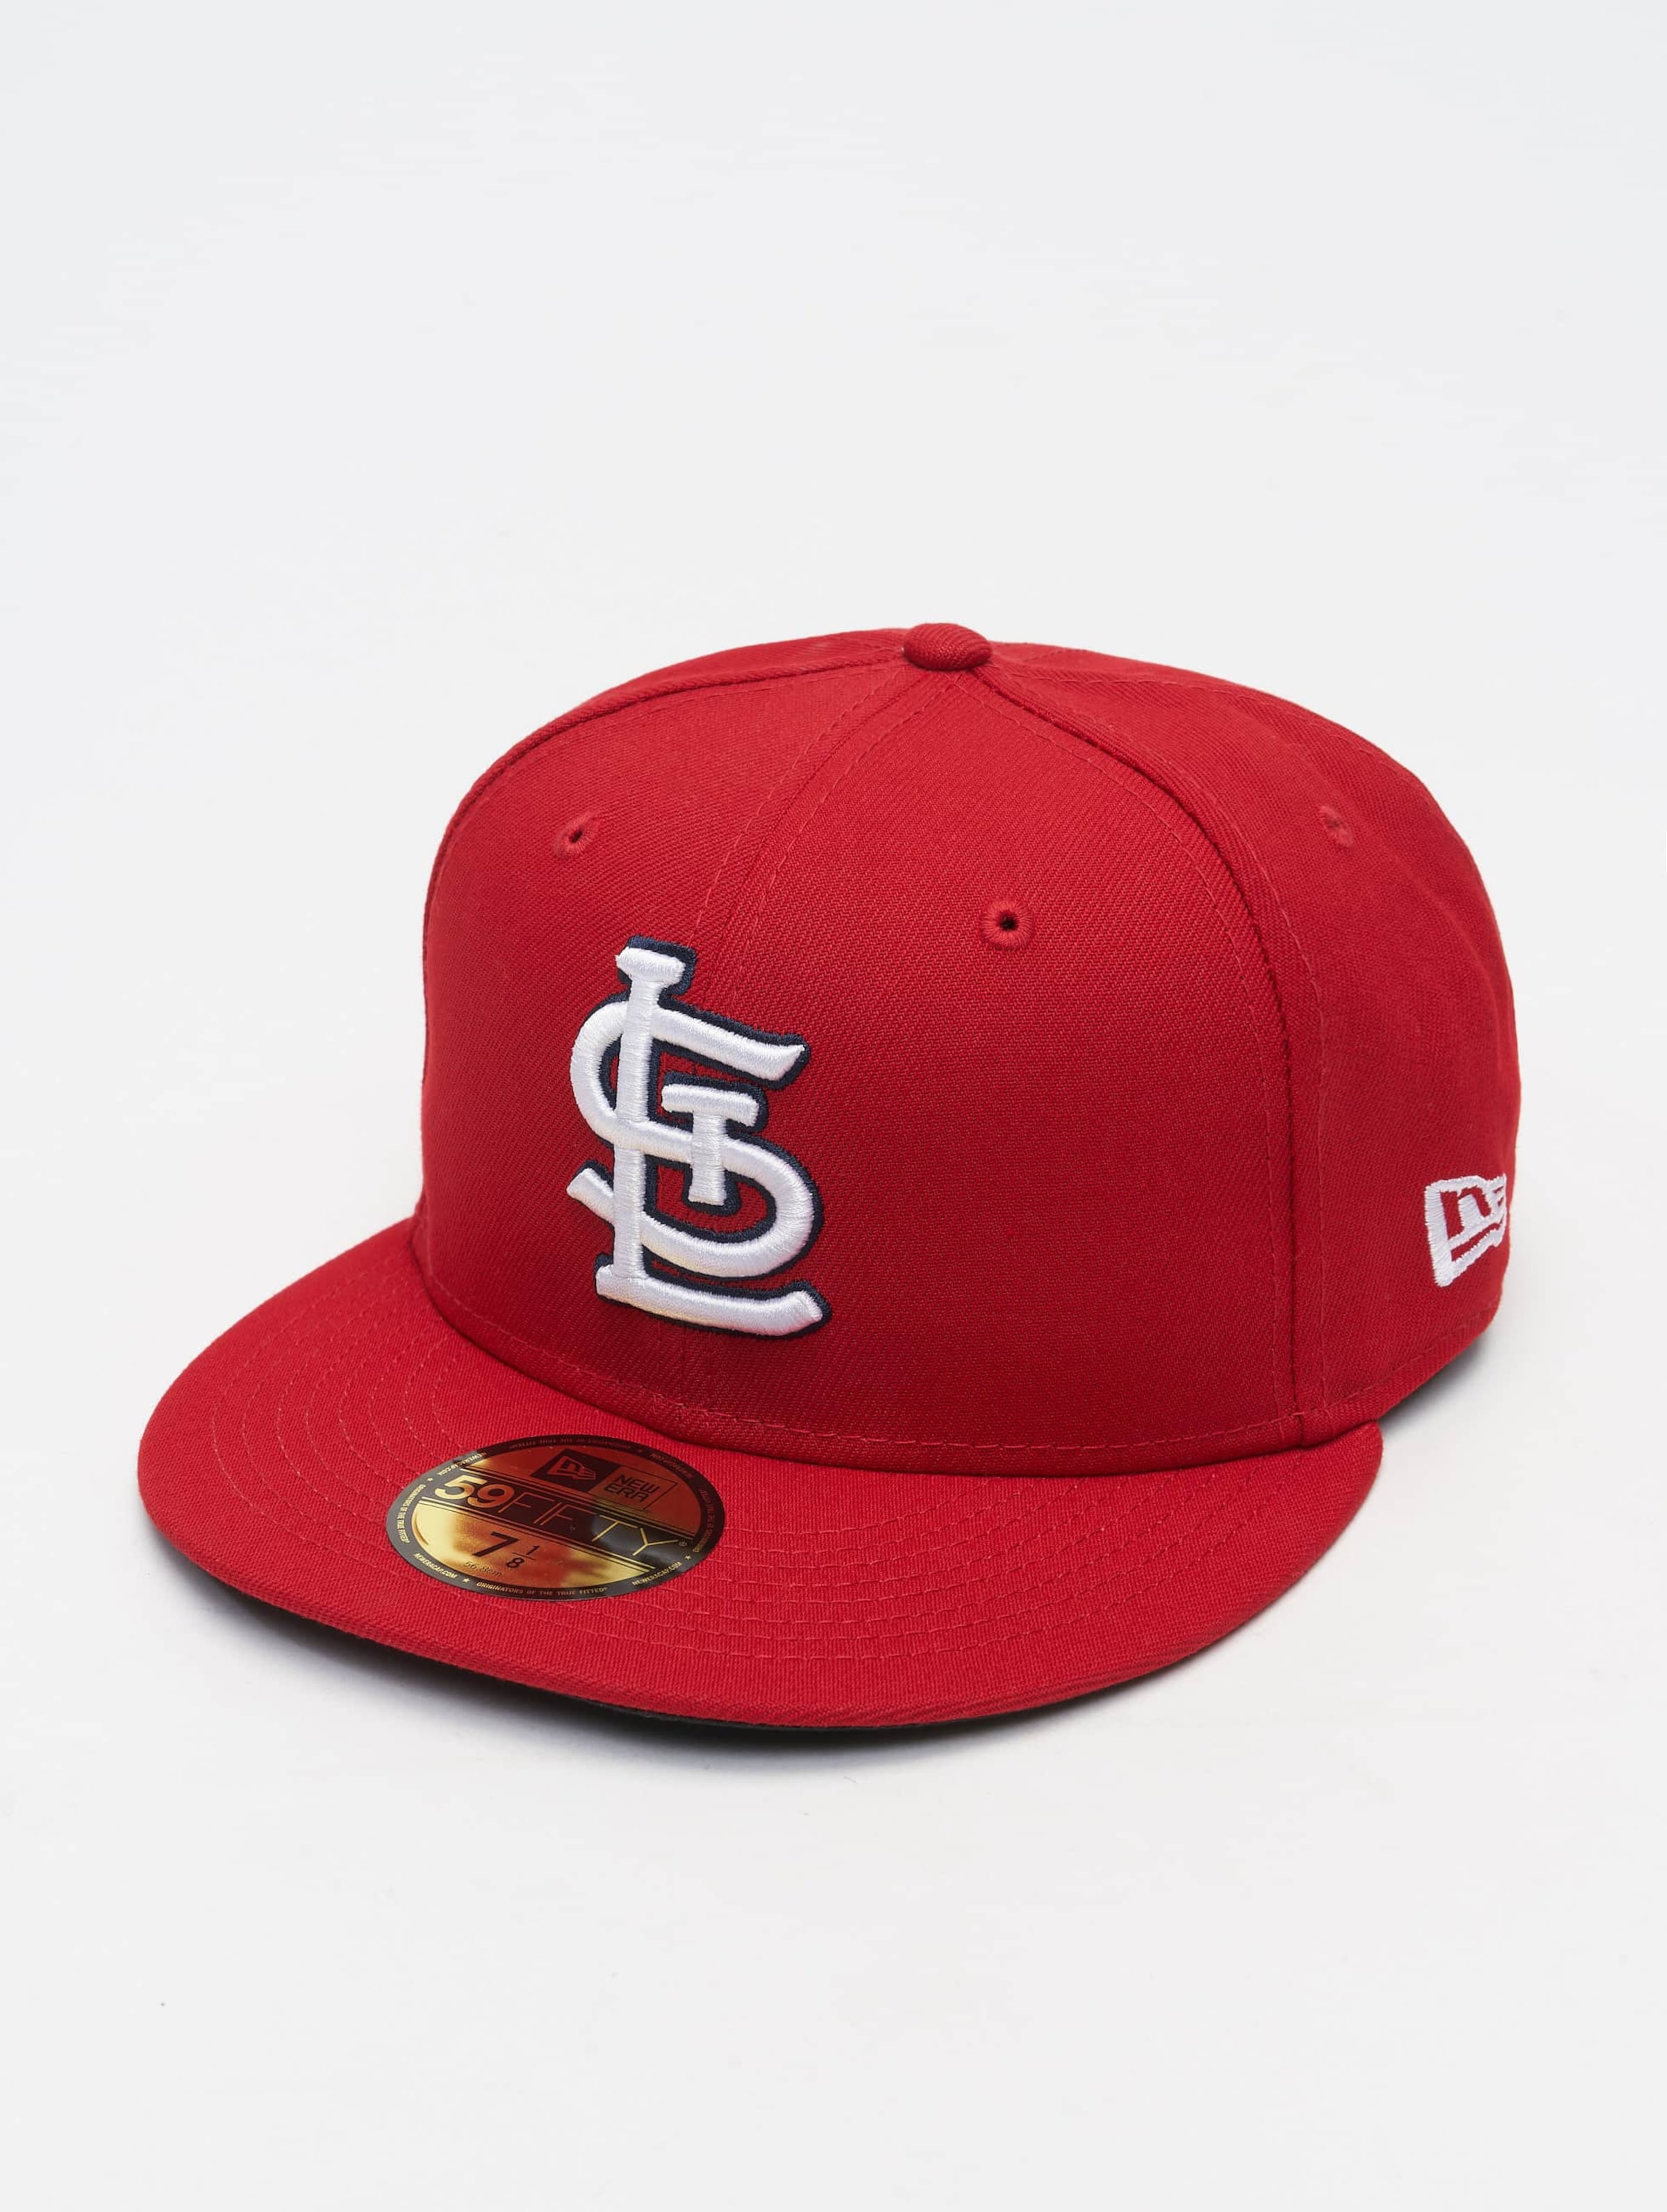 New Era St. Louis Cardinals MLB AC Perf Red 59FIFTY Fitted Cap (7 1/2) XL